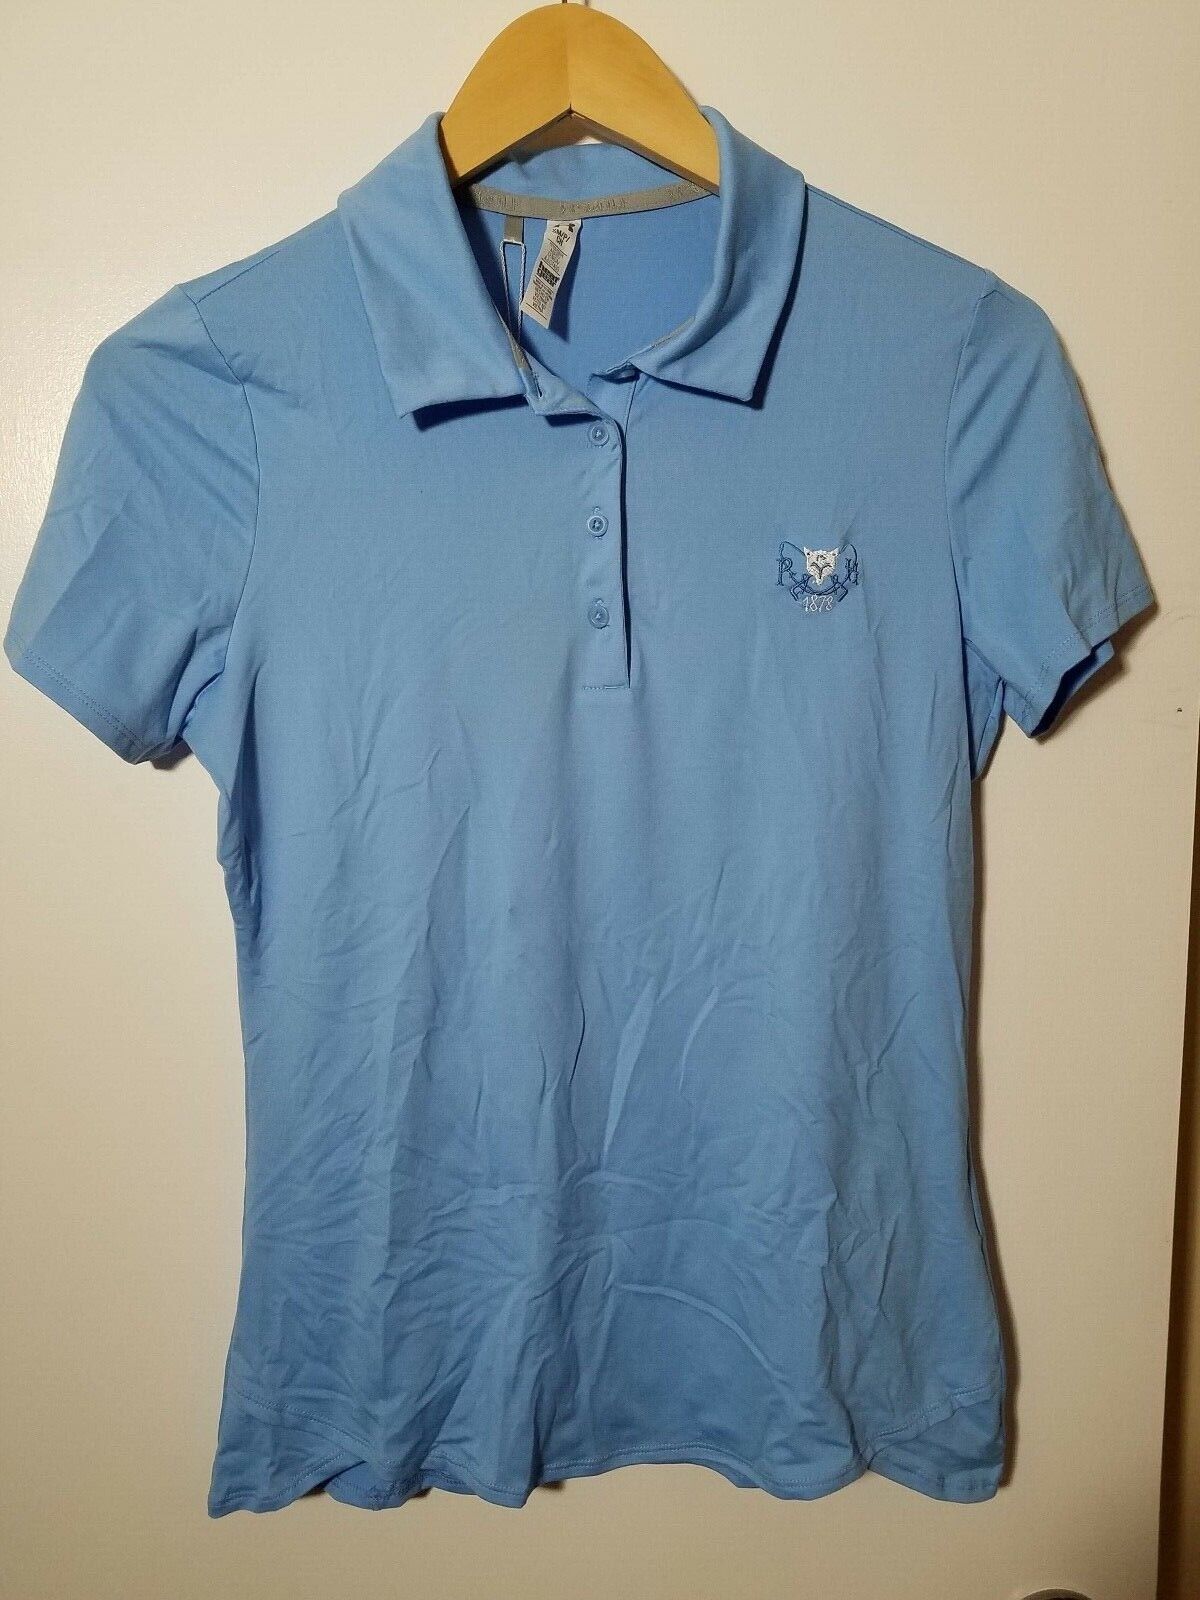 1 NWT UNDER ARMOUR WOMEN\'S POLO, SIZE: SMALL, COLOR: LIGHT BLUE (J81)